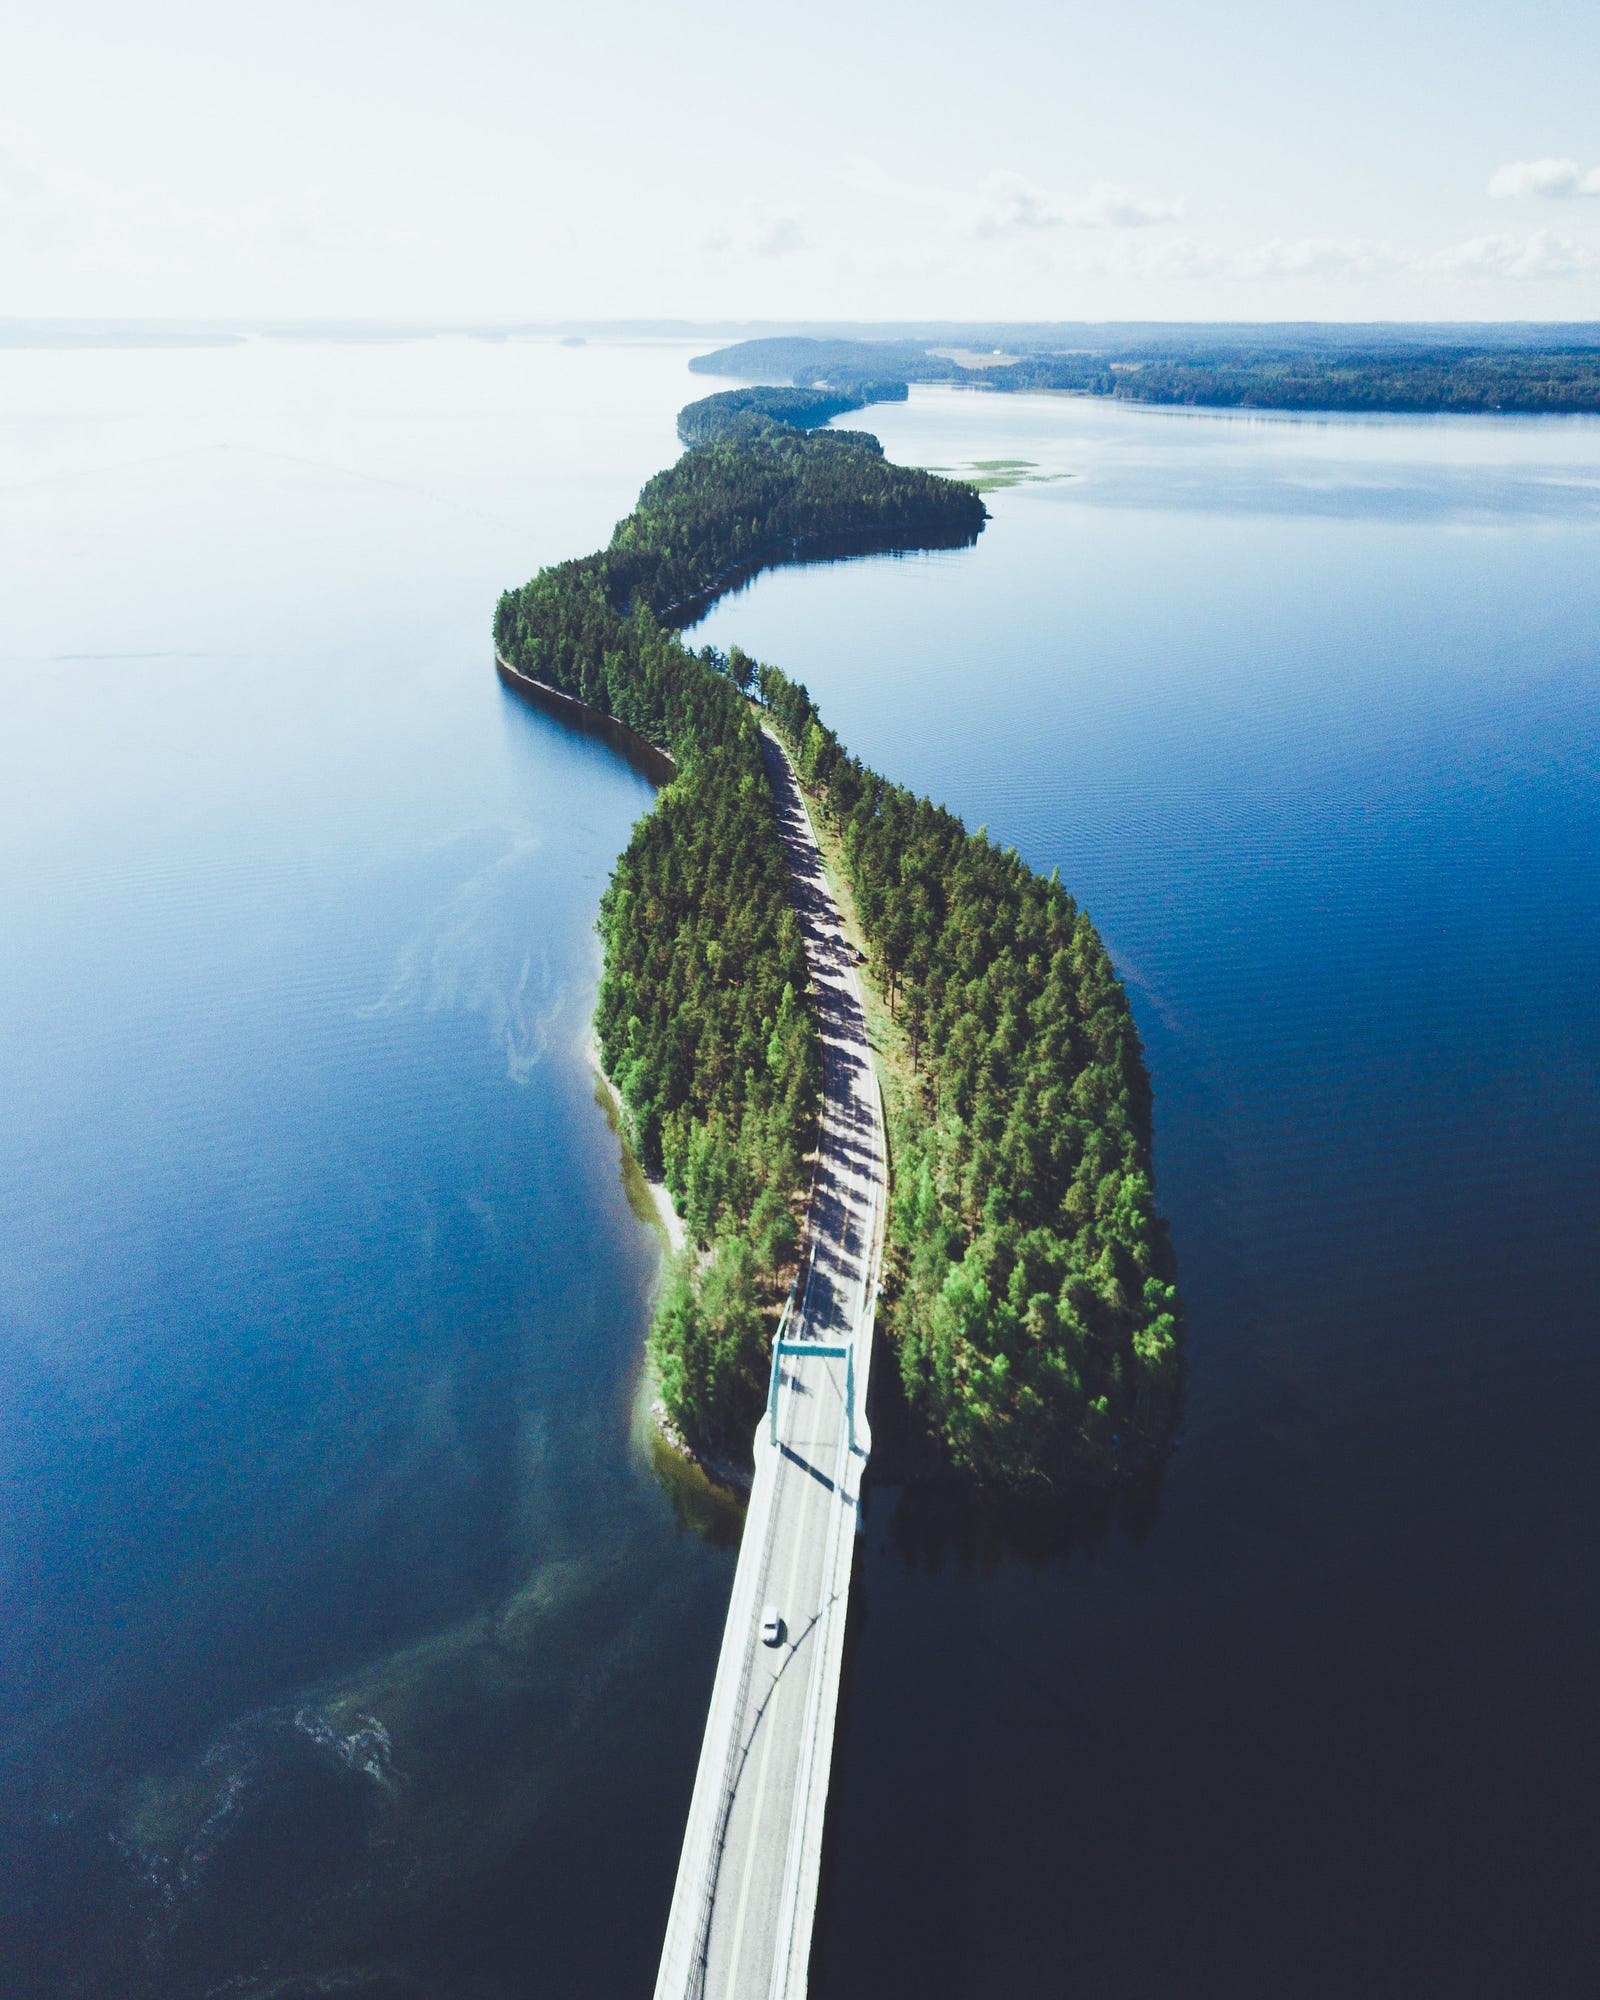 A stunning road in Finland meanders across a large lake, with the road having narrow wooded areas on either side. A new Finnish study shows that being more physically active was linked to a lower risk of dying from various causes.